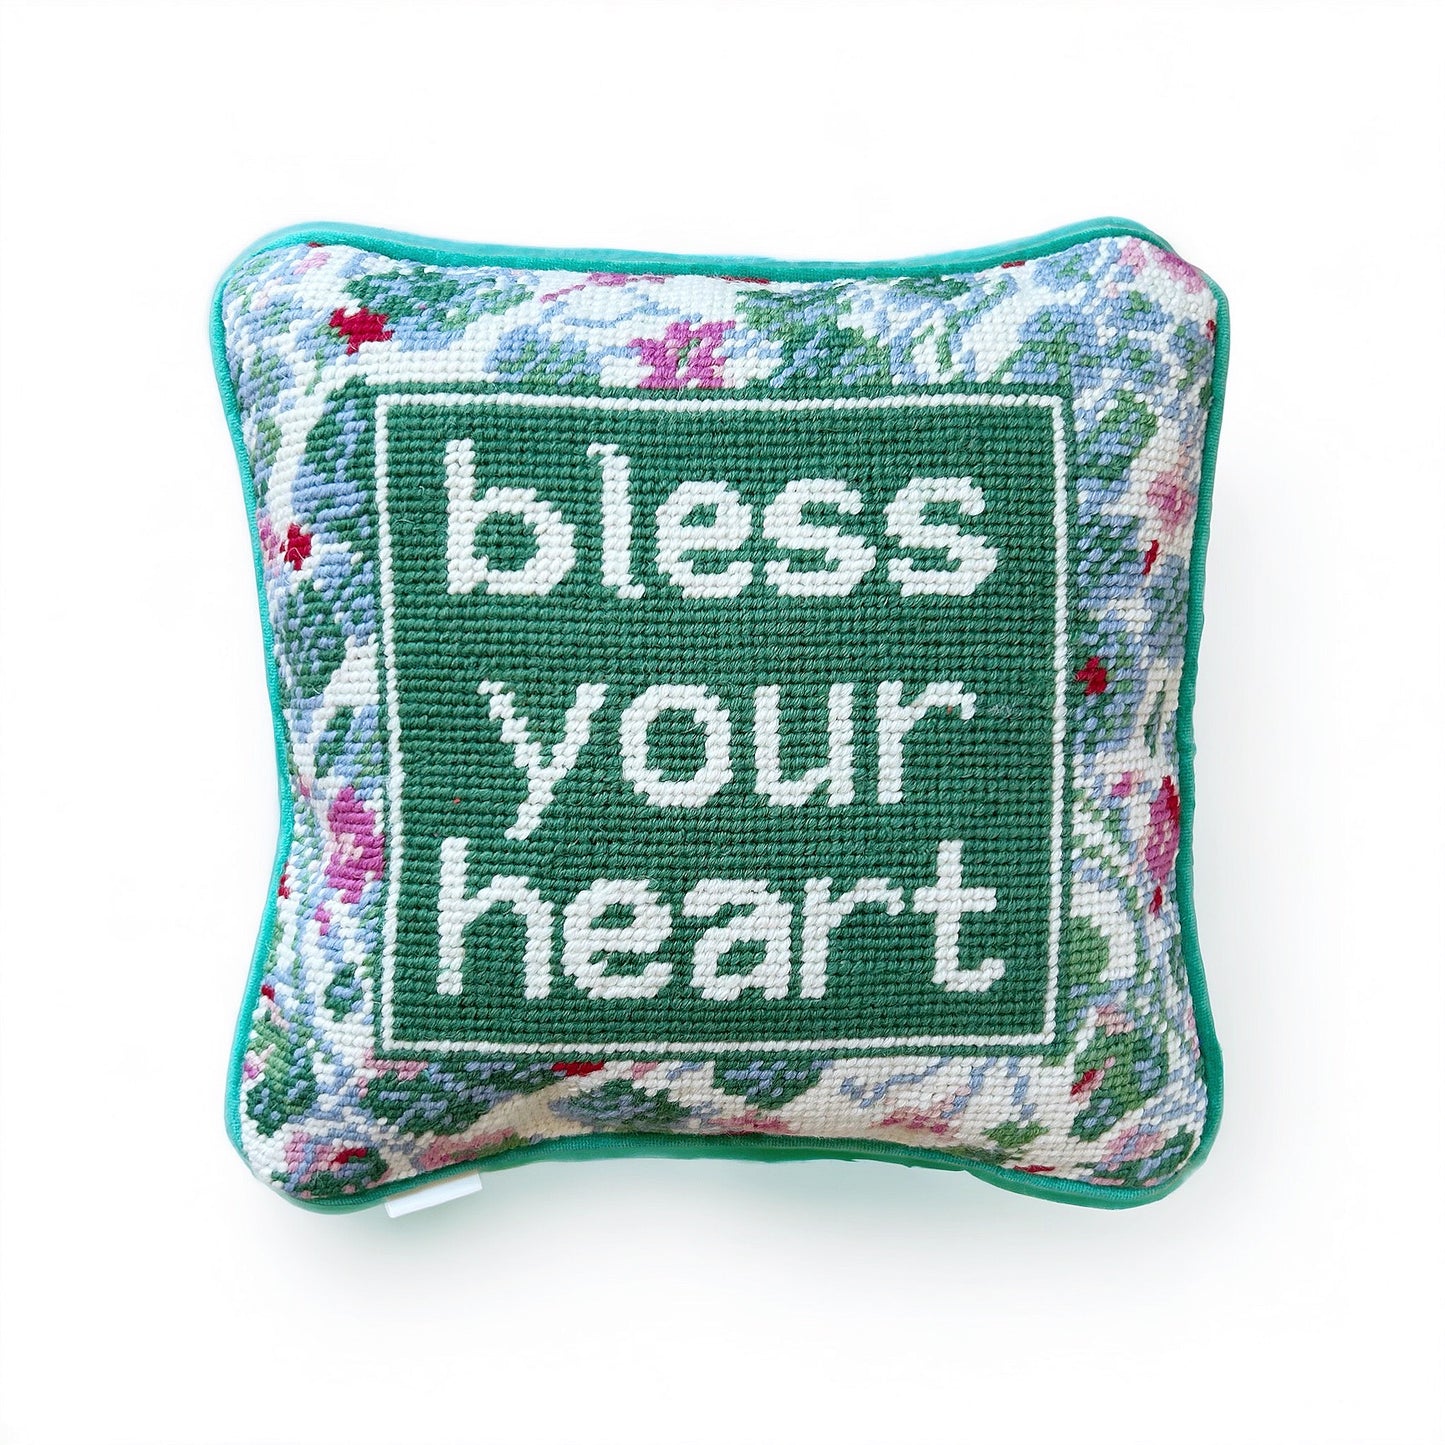 Hooked Bless Your Heart Throw Pillow